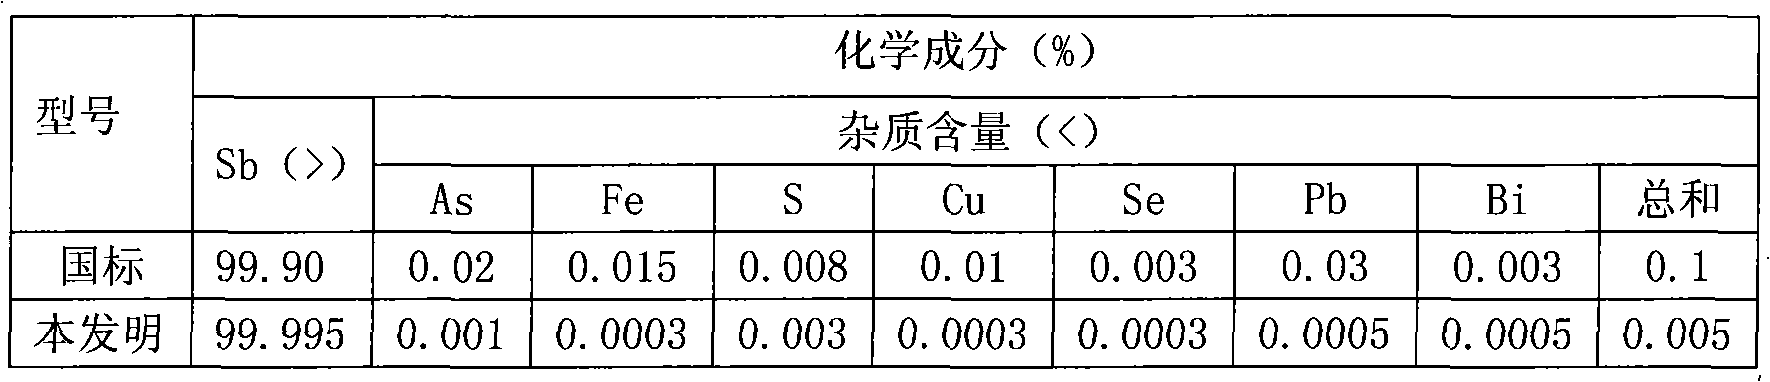 Method and device for producing high-purity antimony